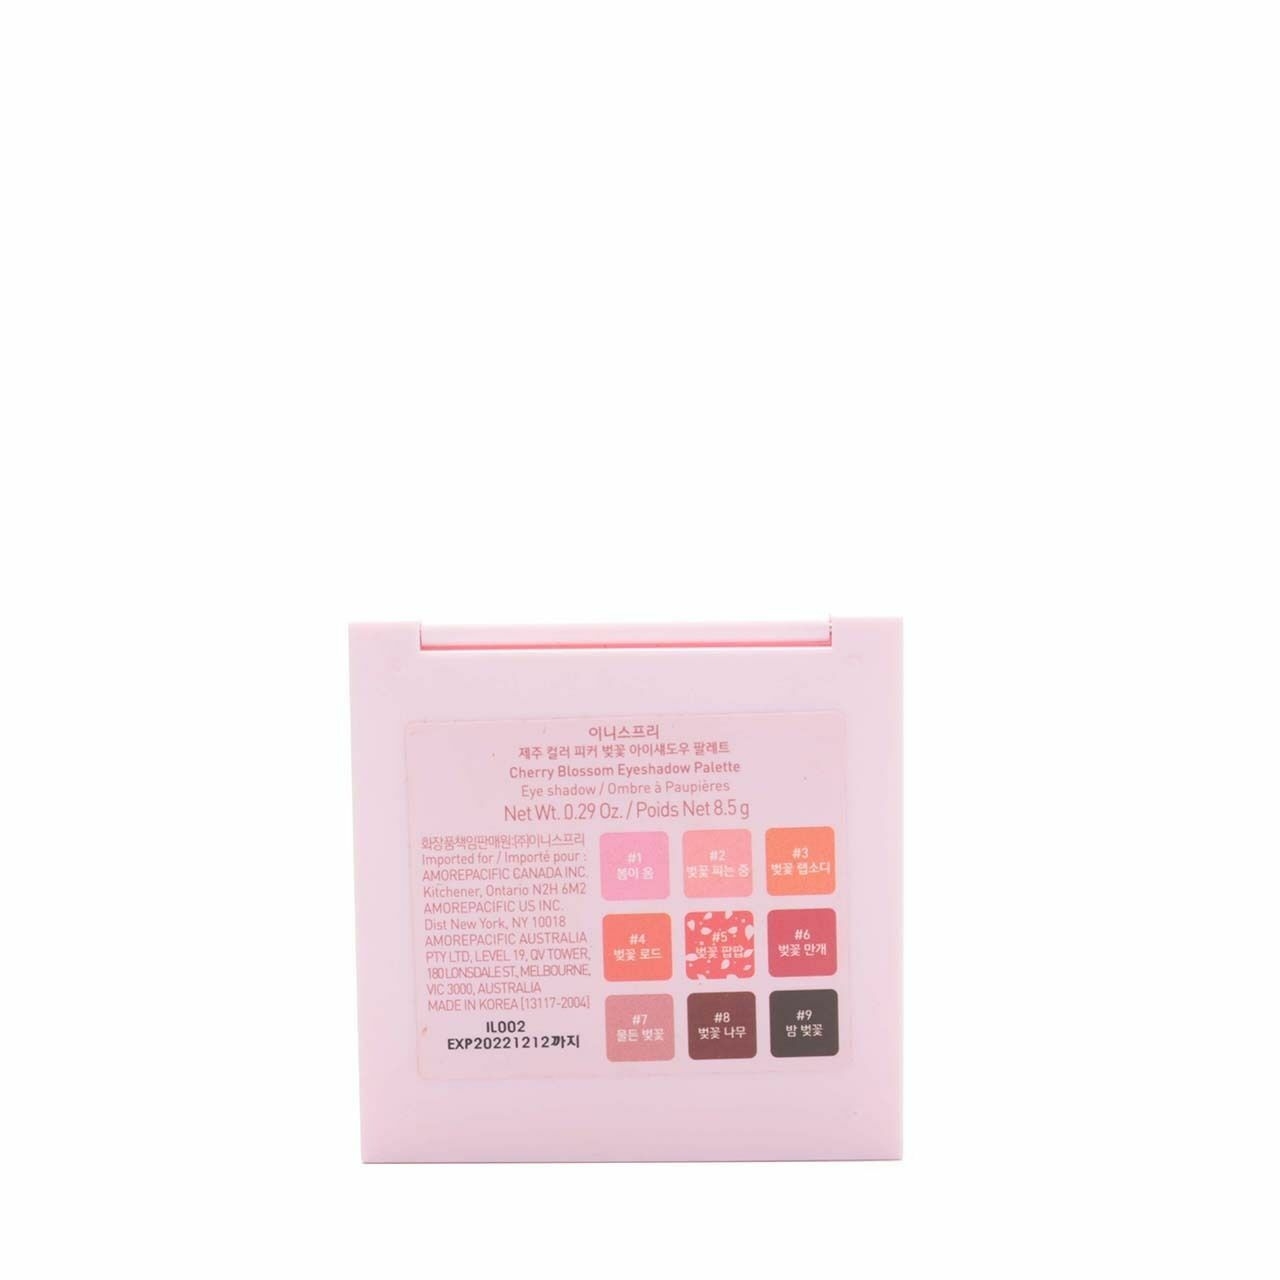 Innisfree Cherry Blossom Eyeshadow Sets and Palette